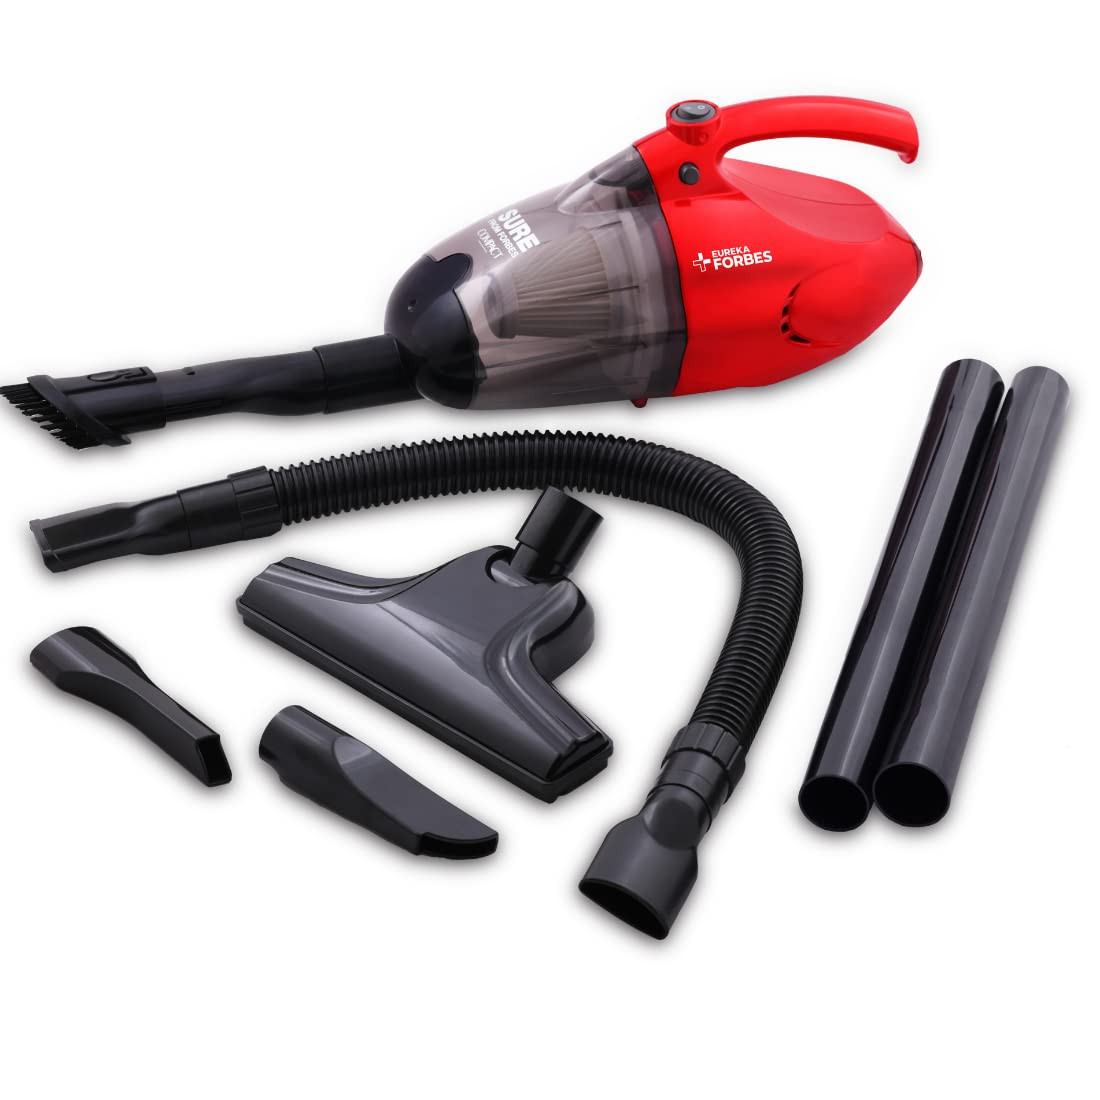 Eureka Forbes Compact 700 Watts Powerful Suction  Blower Vacuum Cleaner with Washable HEPA Filter  6 AccessoriesCompact1 Year WarrantyLight Weight  Easy to use Red  Black